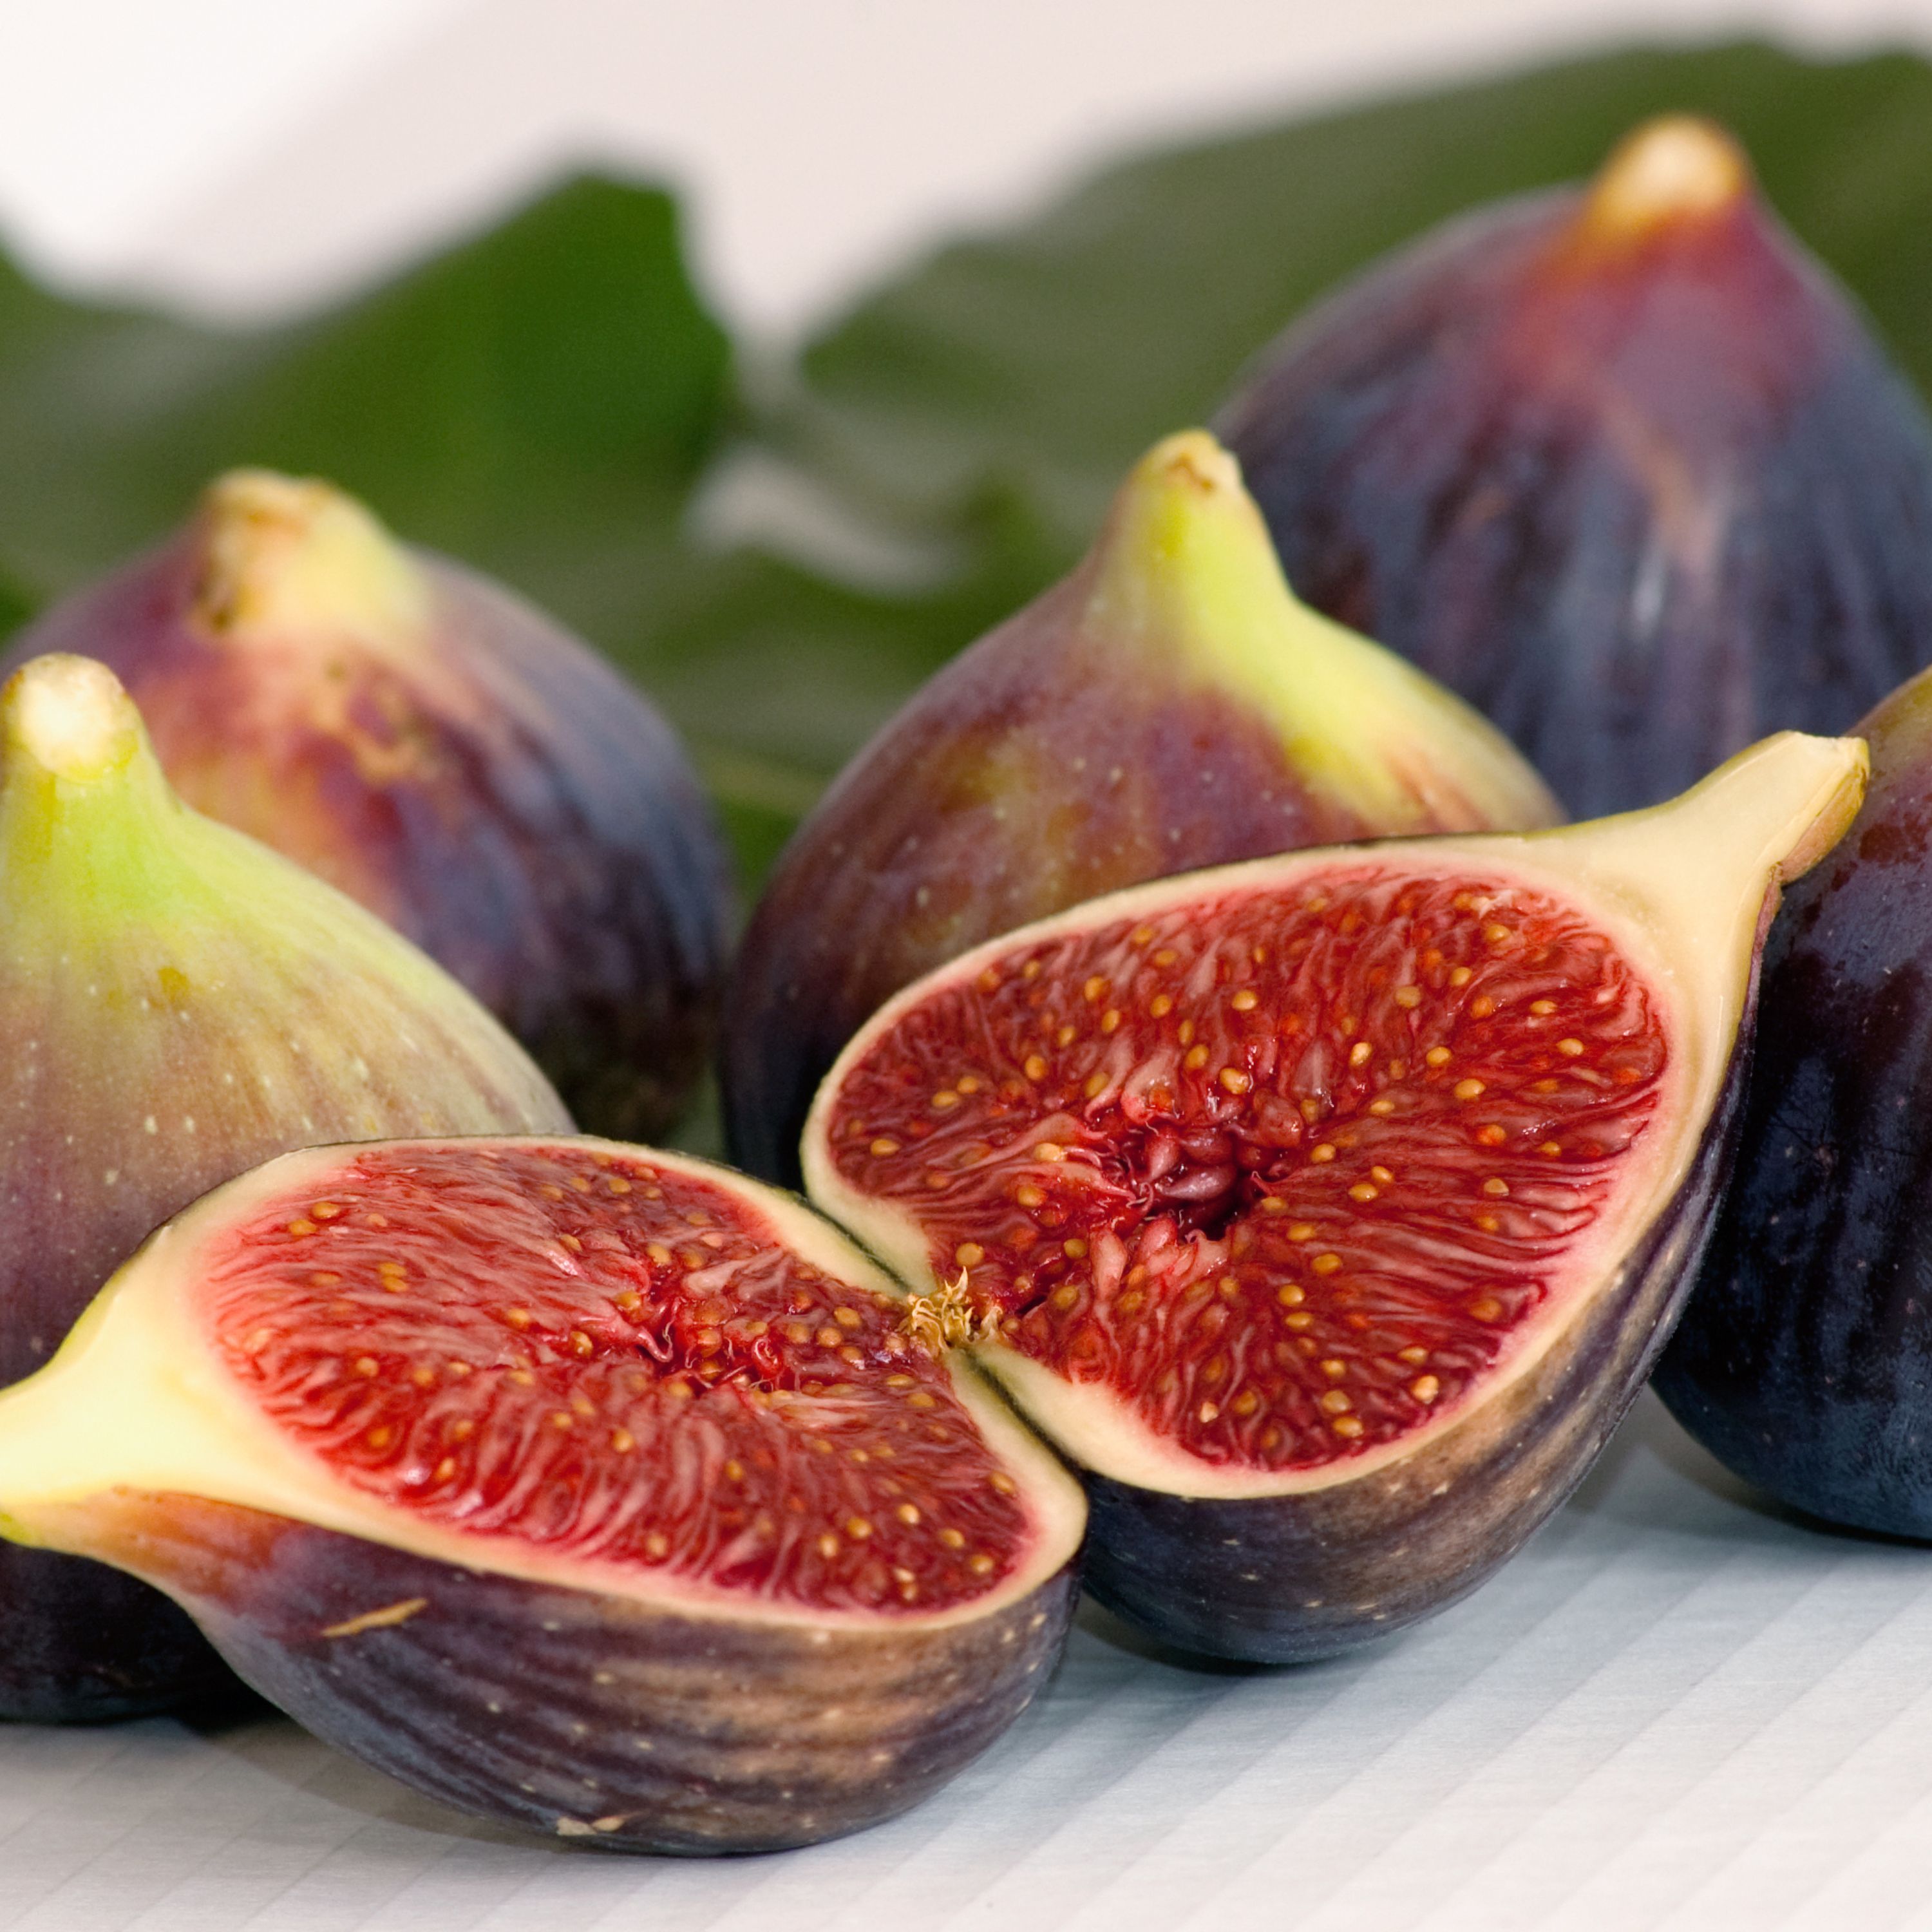 How to Grow Figs in Kentucky